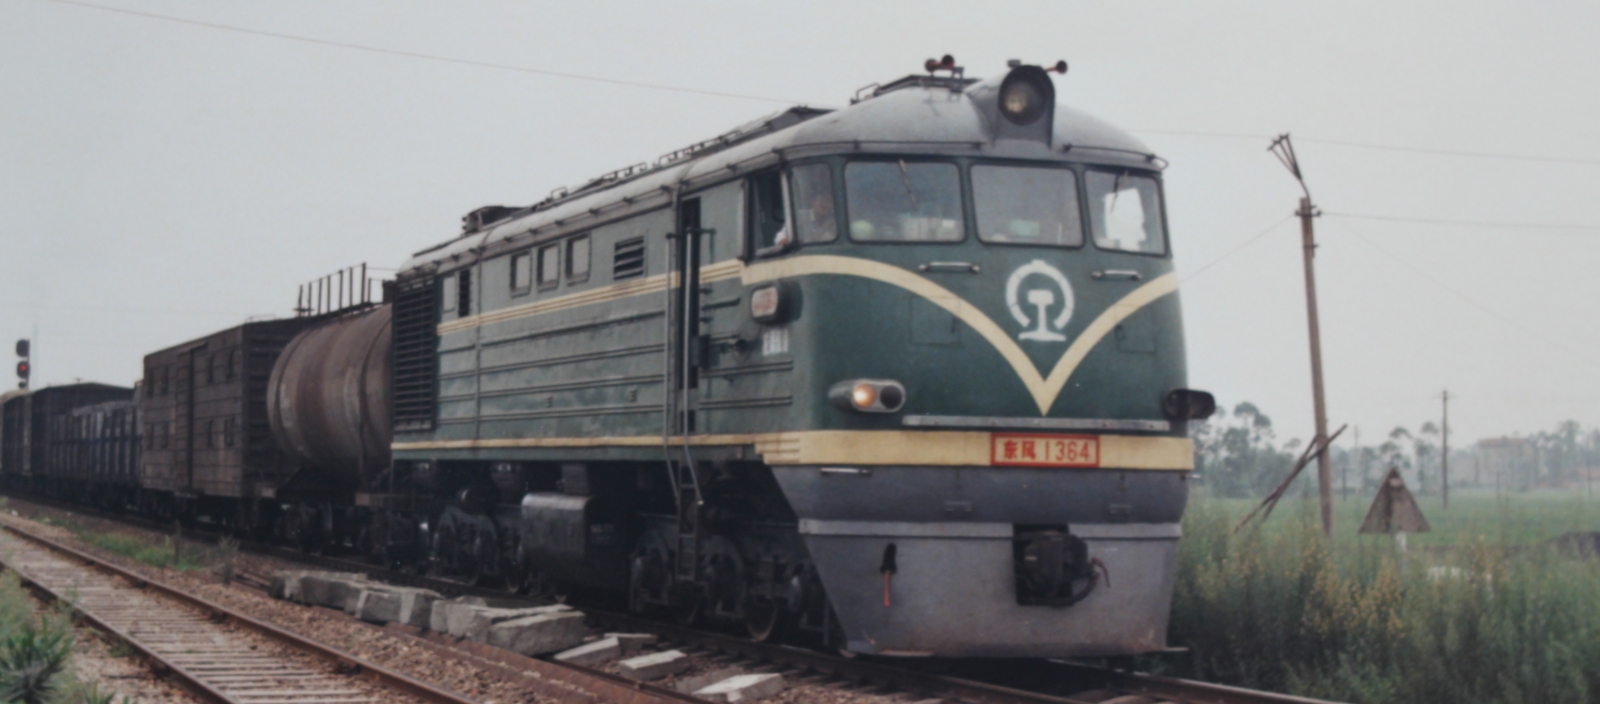 A unit with a freight train in 1991 near Chengdu